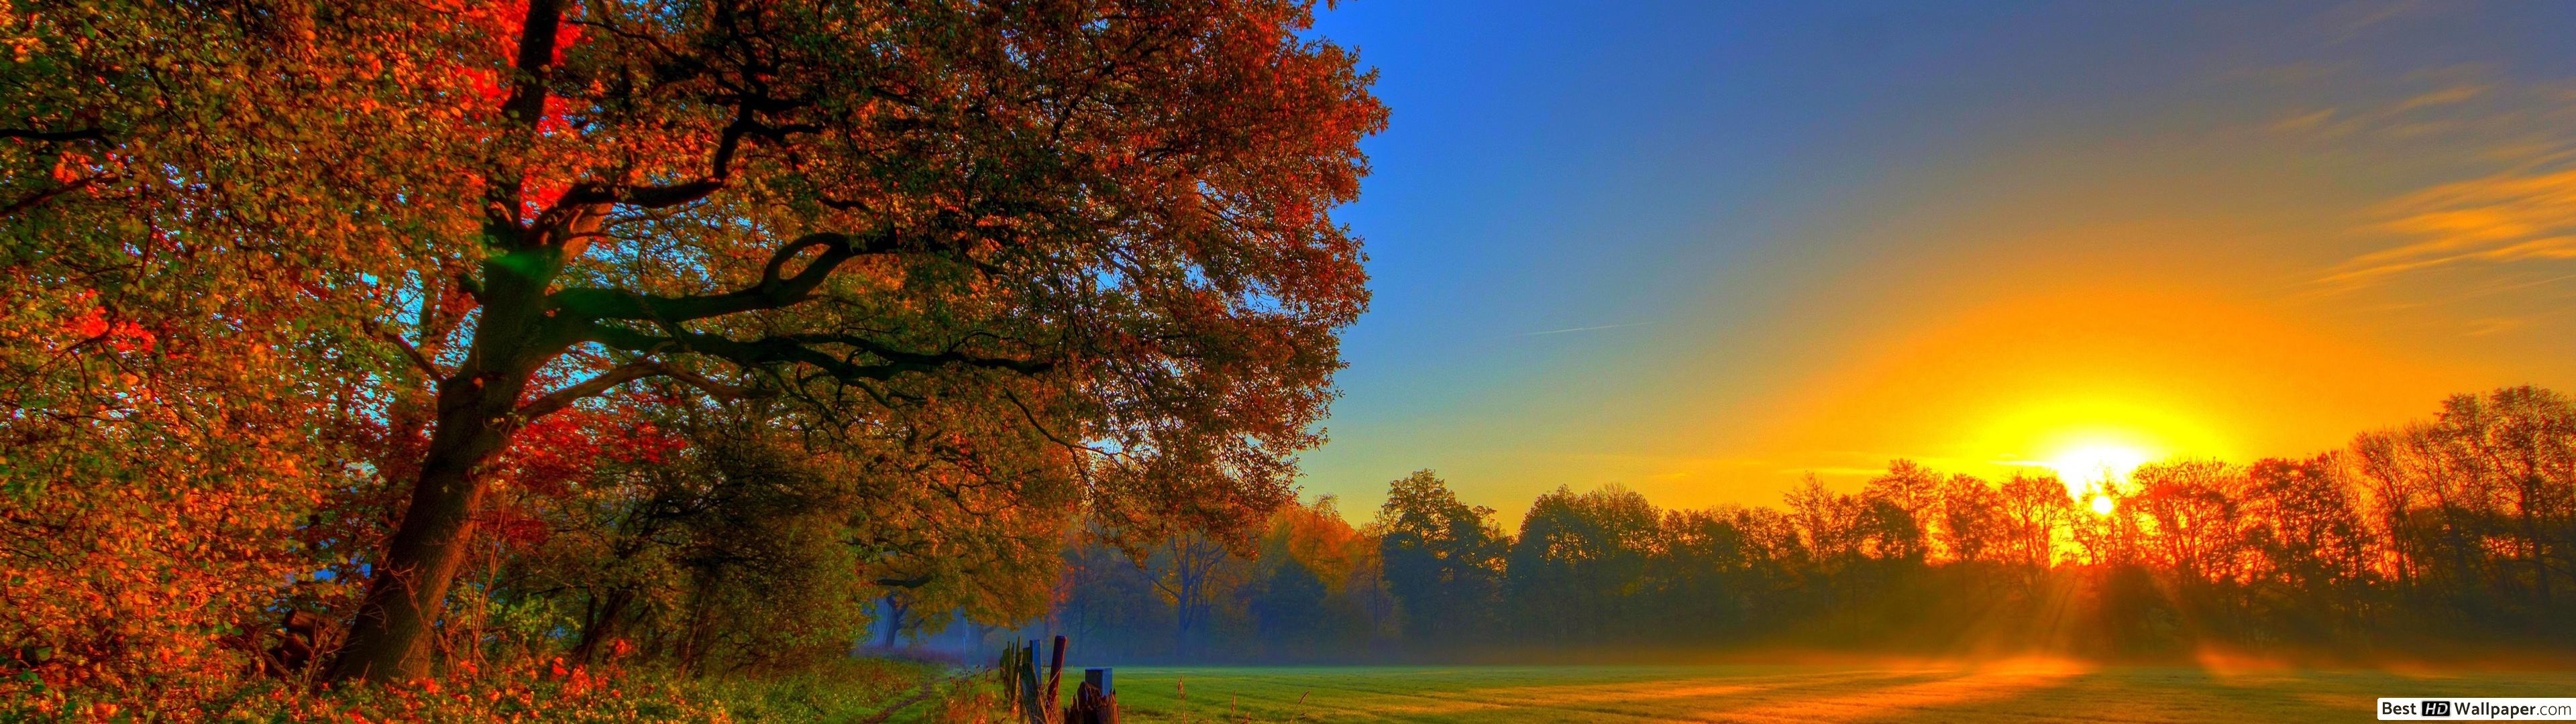 Autumn and sunset HD wallpaper download